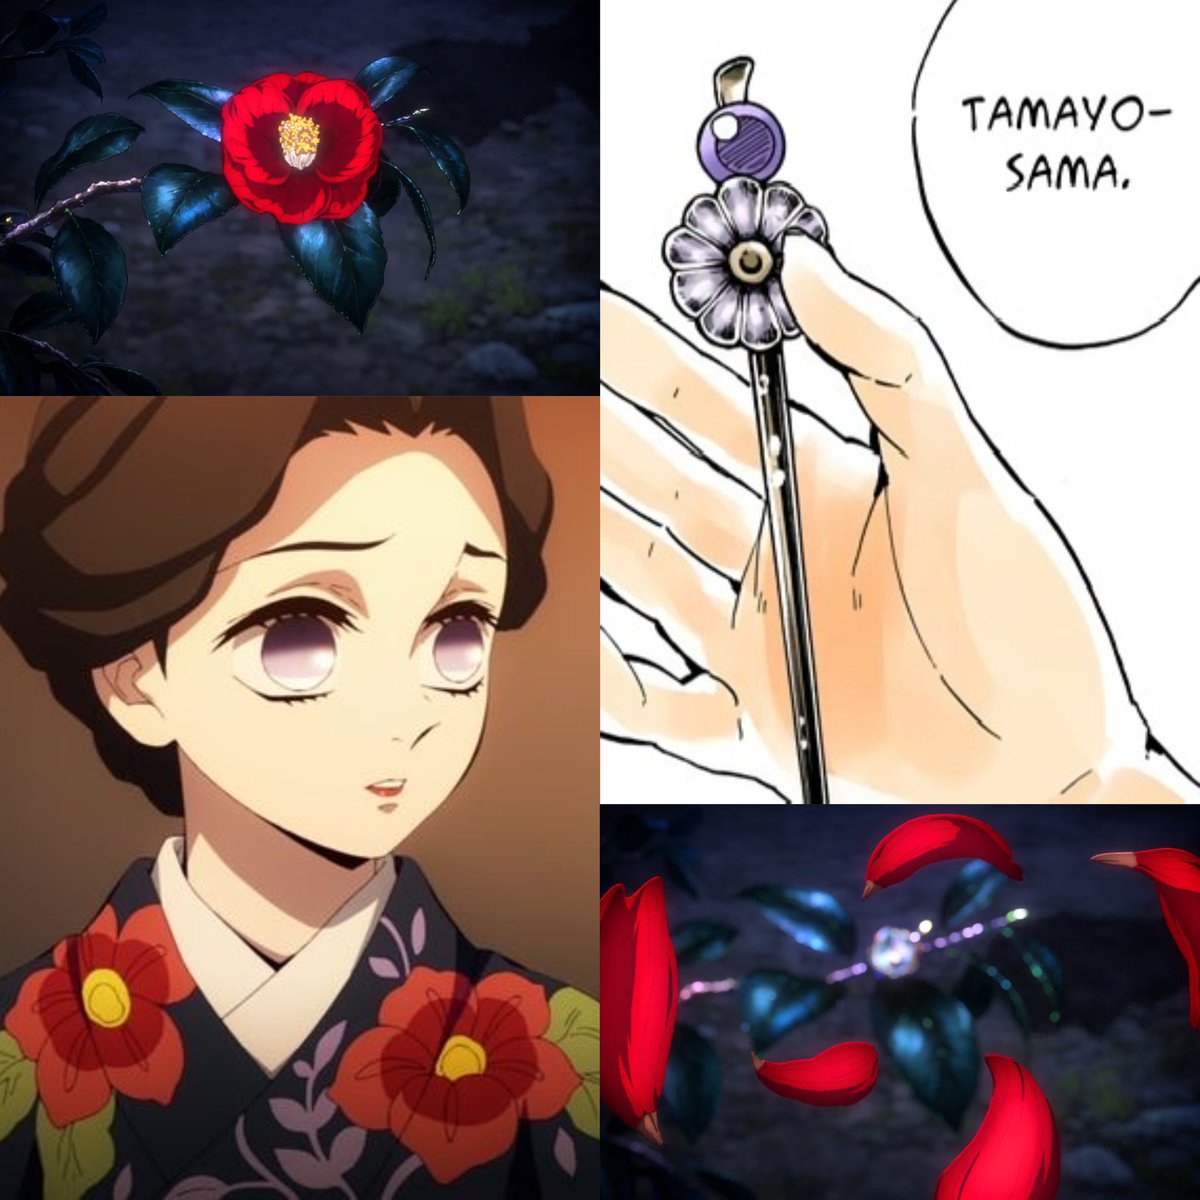 I noticed that in the ending for the hashira training arc, this flower looks like the flowers on Lady Tamayo’s kimono 

When the flower is destroyed, the middle part looks almost like her hairpin

Could this be foreshadowing something?